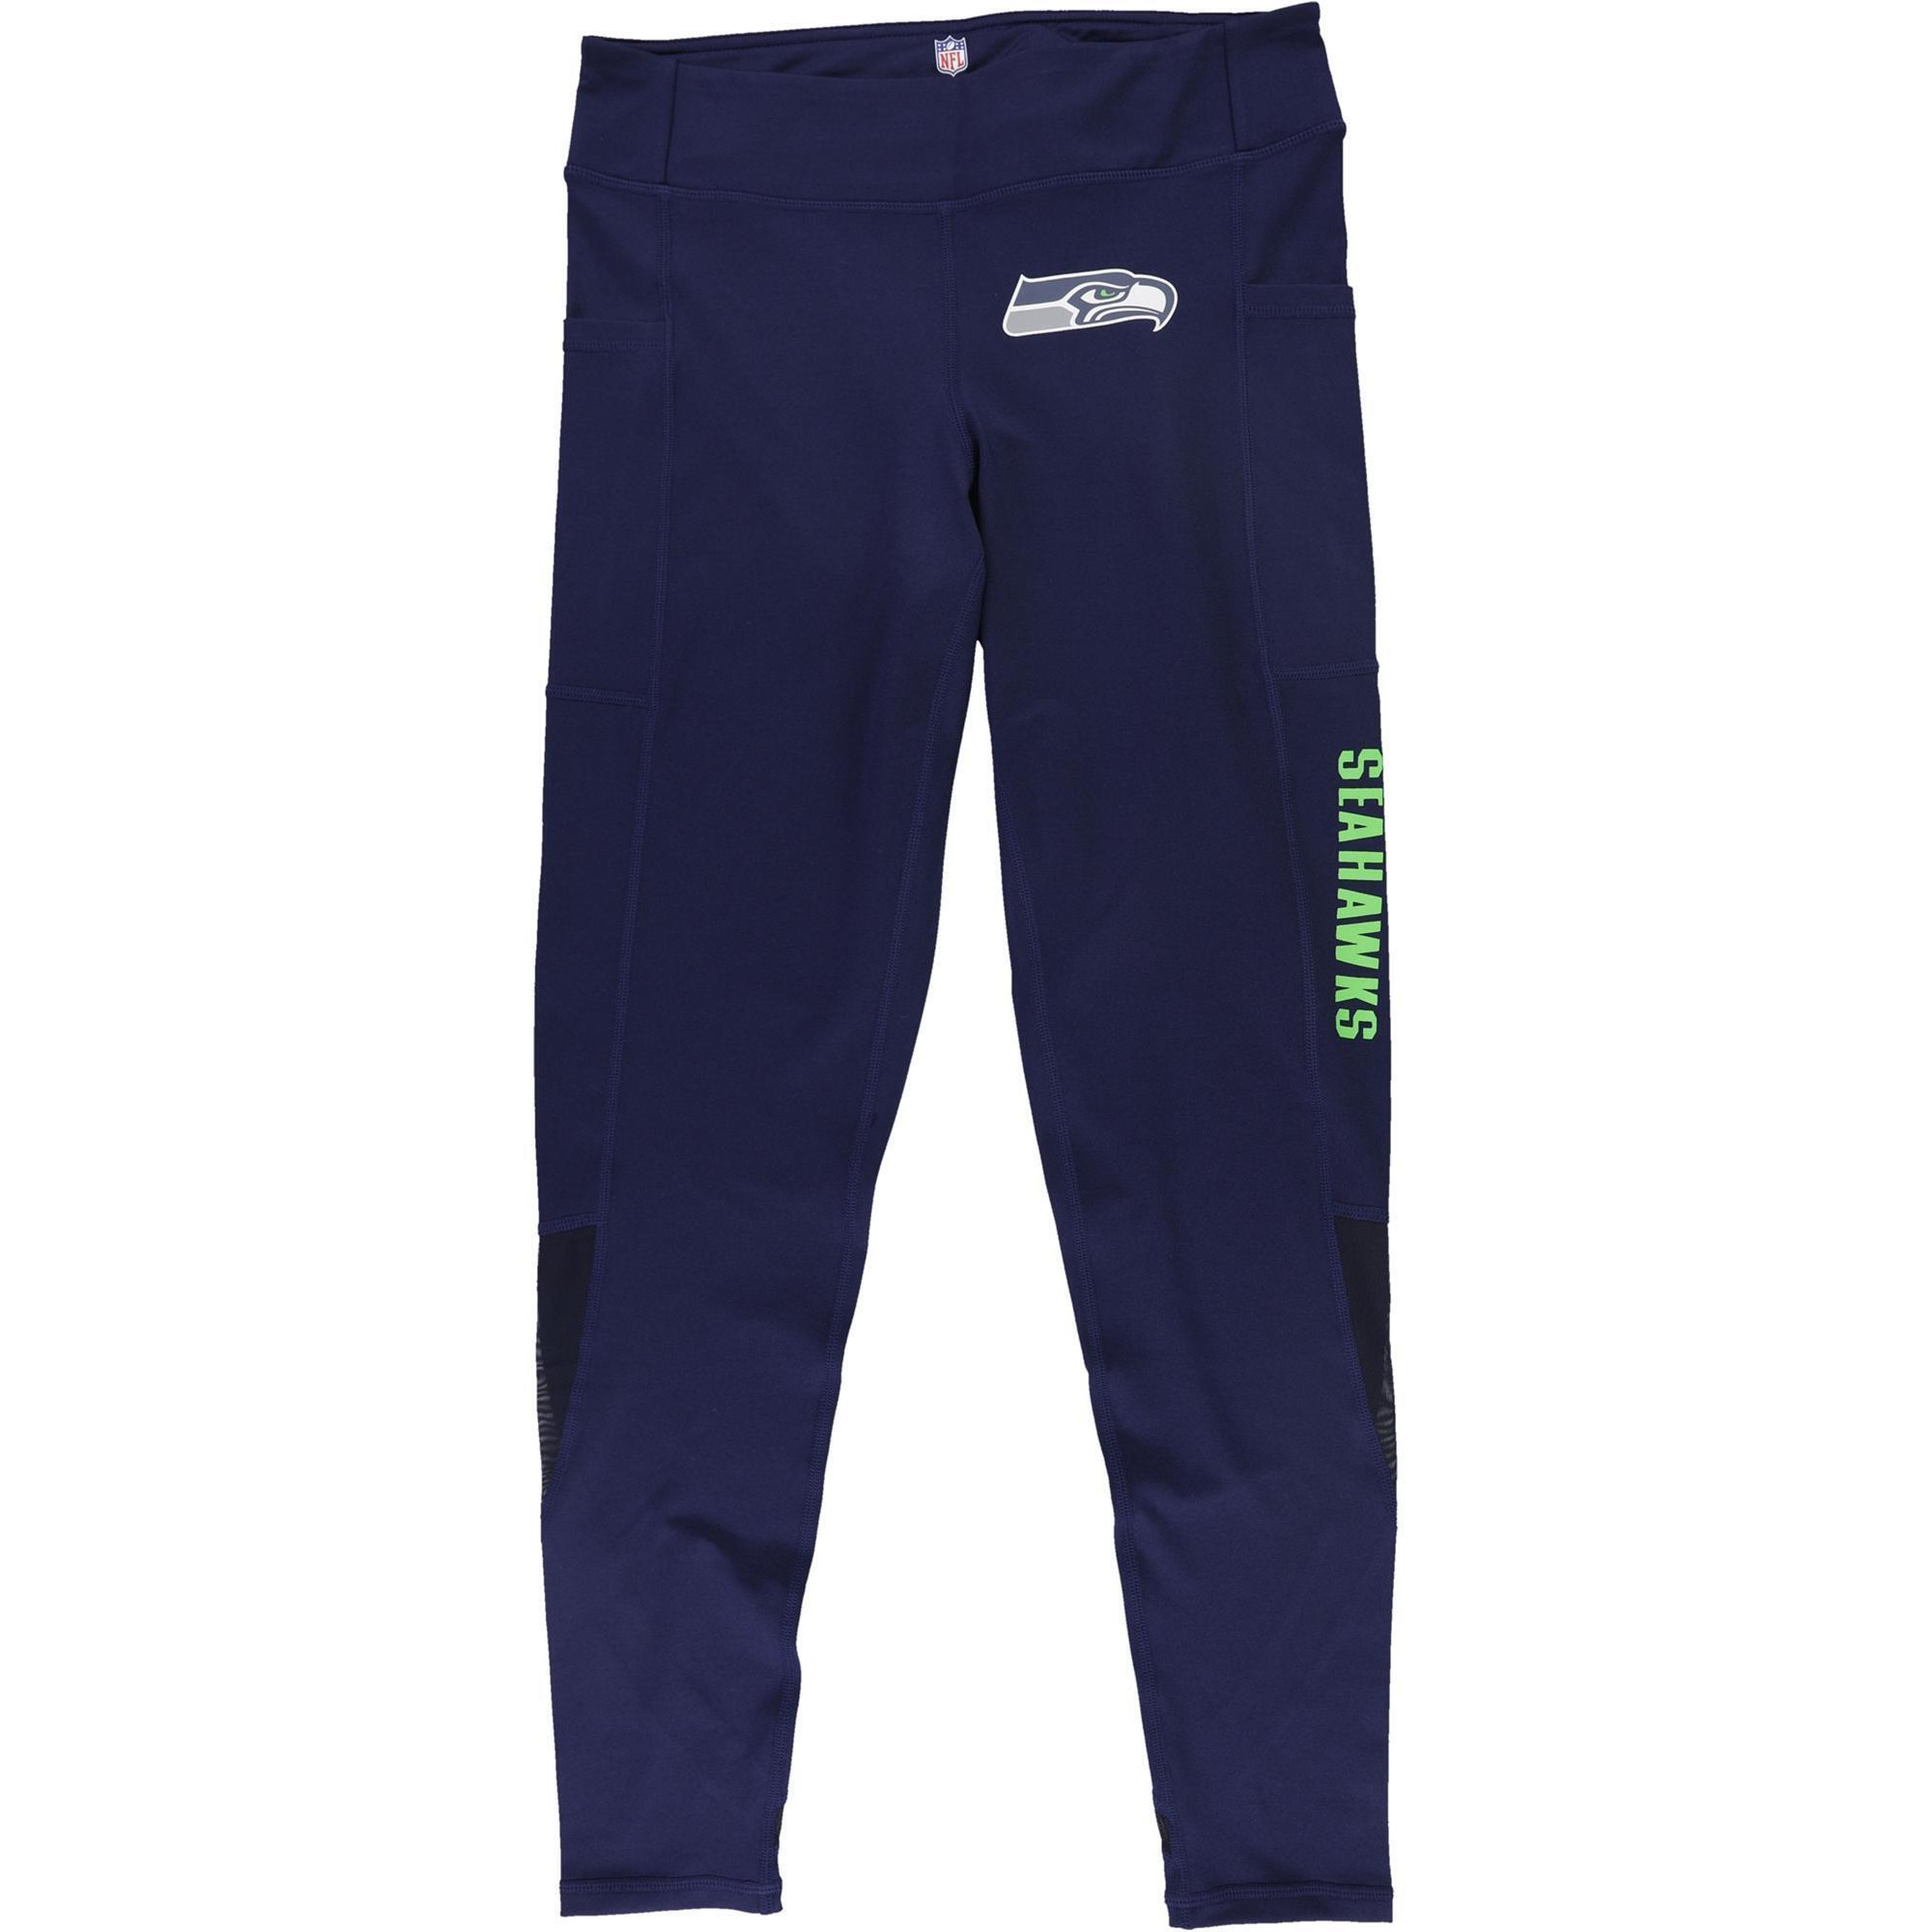 MSX Womens Seattle Seahawks Compression Athletic Pants, Style # 6Q20N882 alternate image